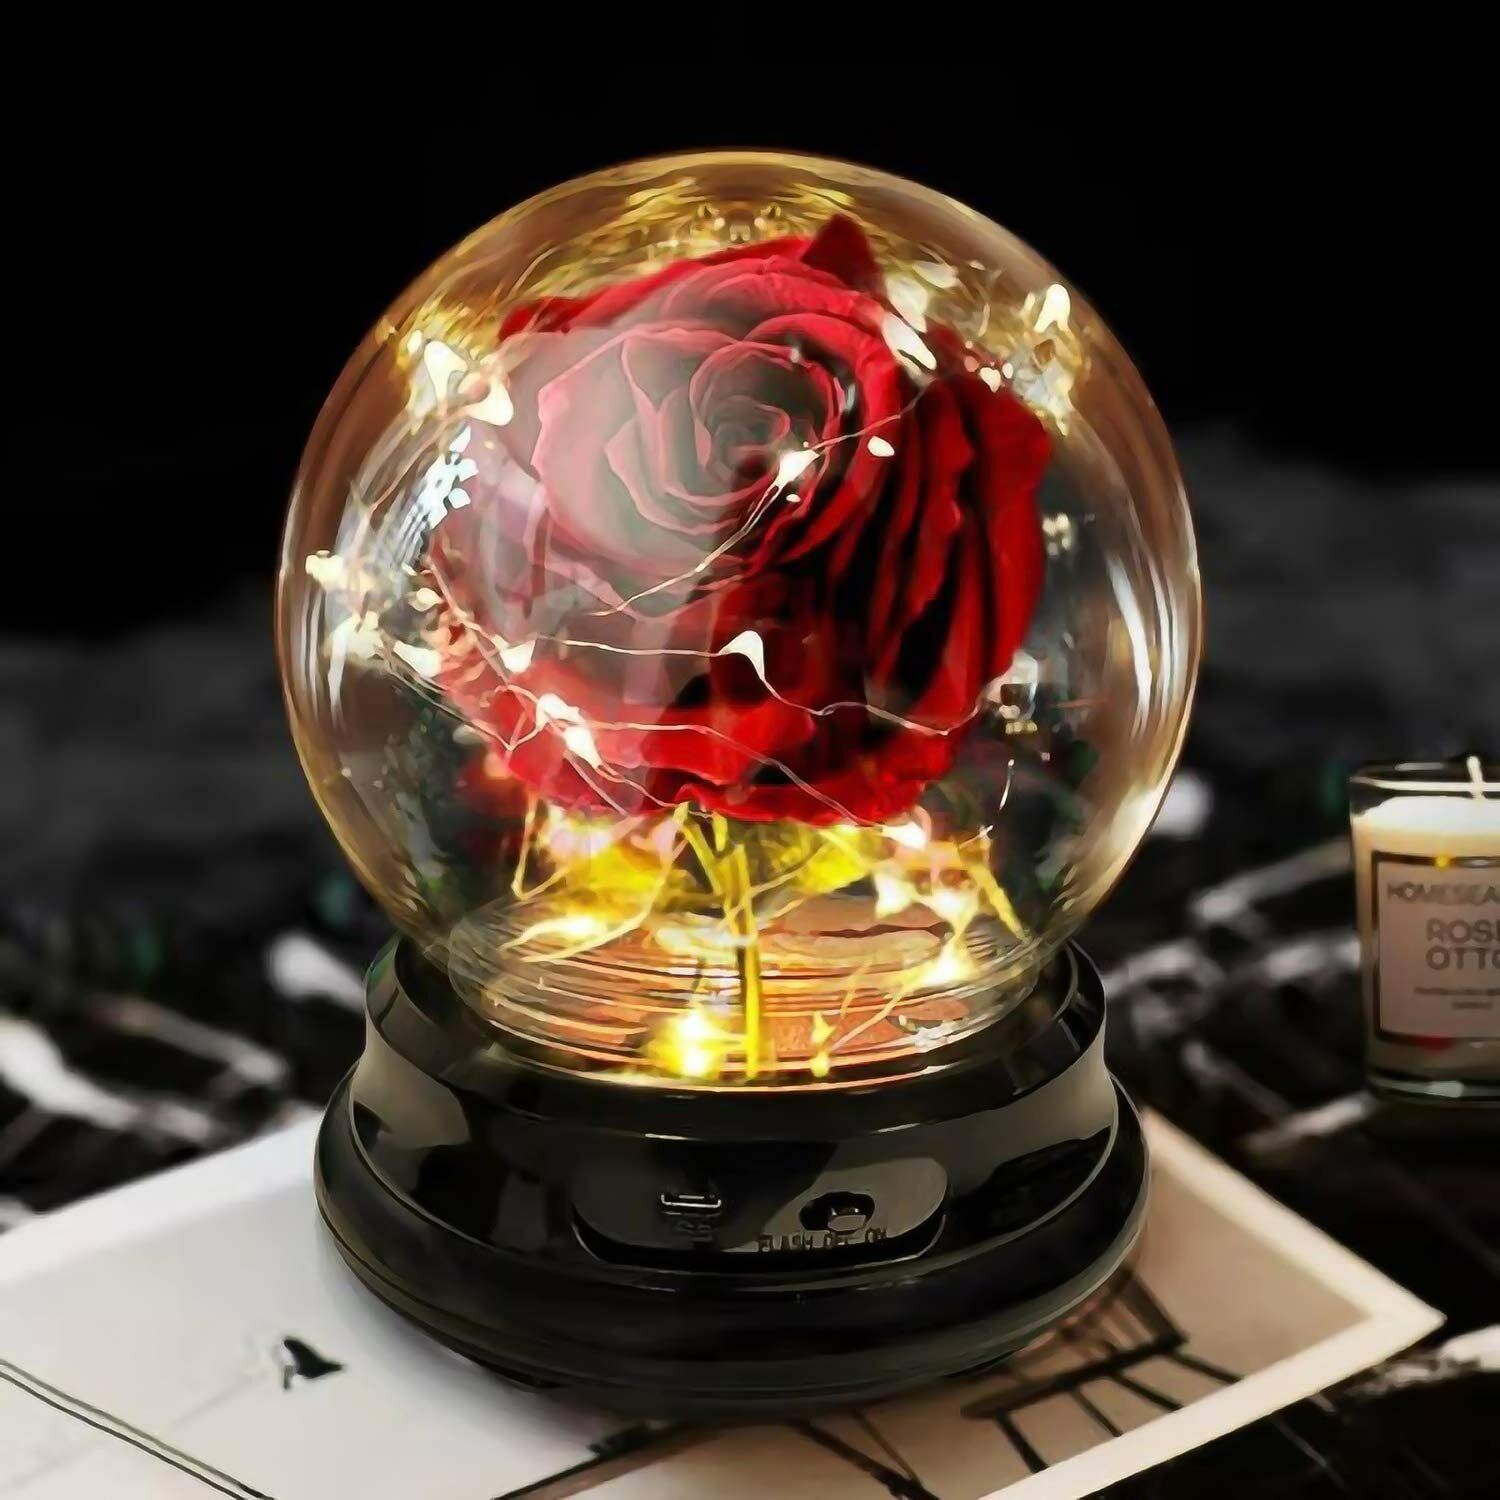 Enchanted Red Silk Rose Gifts - Beauty & The Beast Rose Petals in LED Light Dome